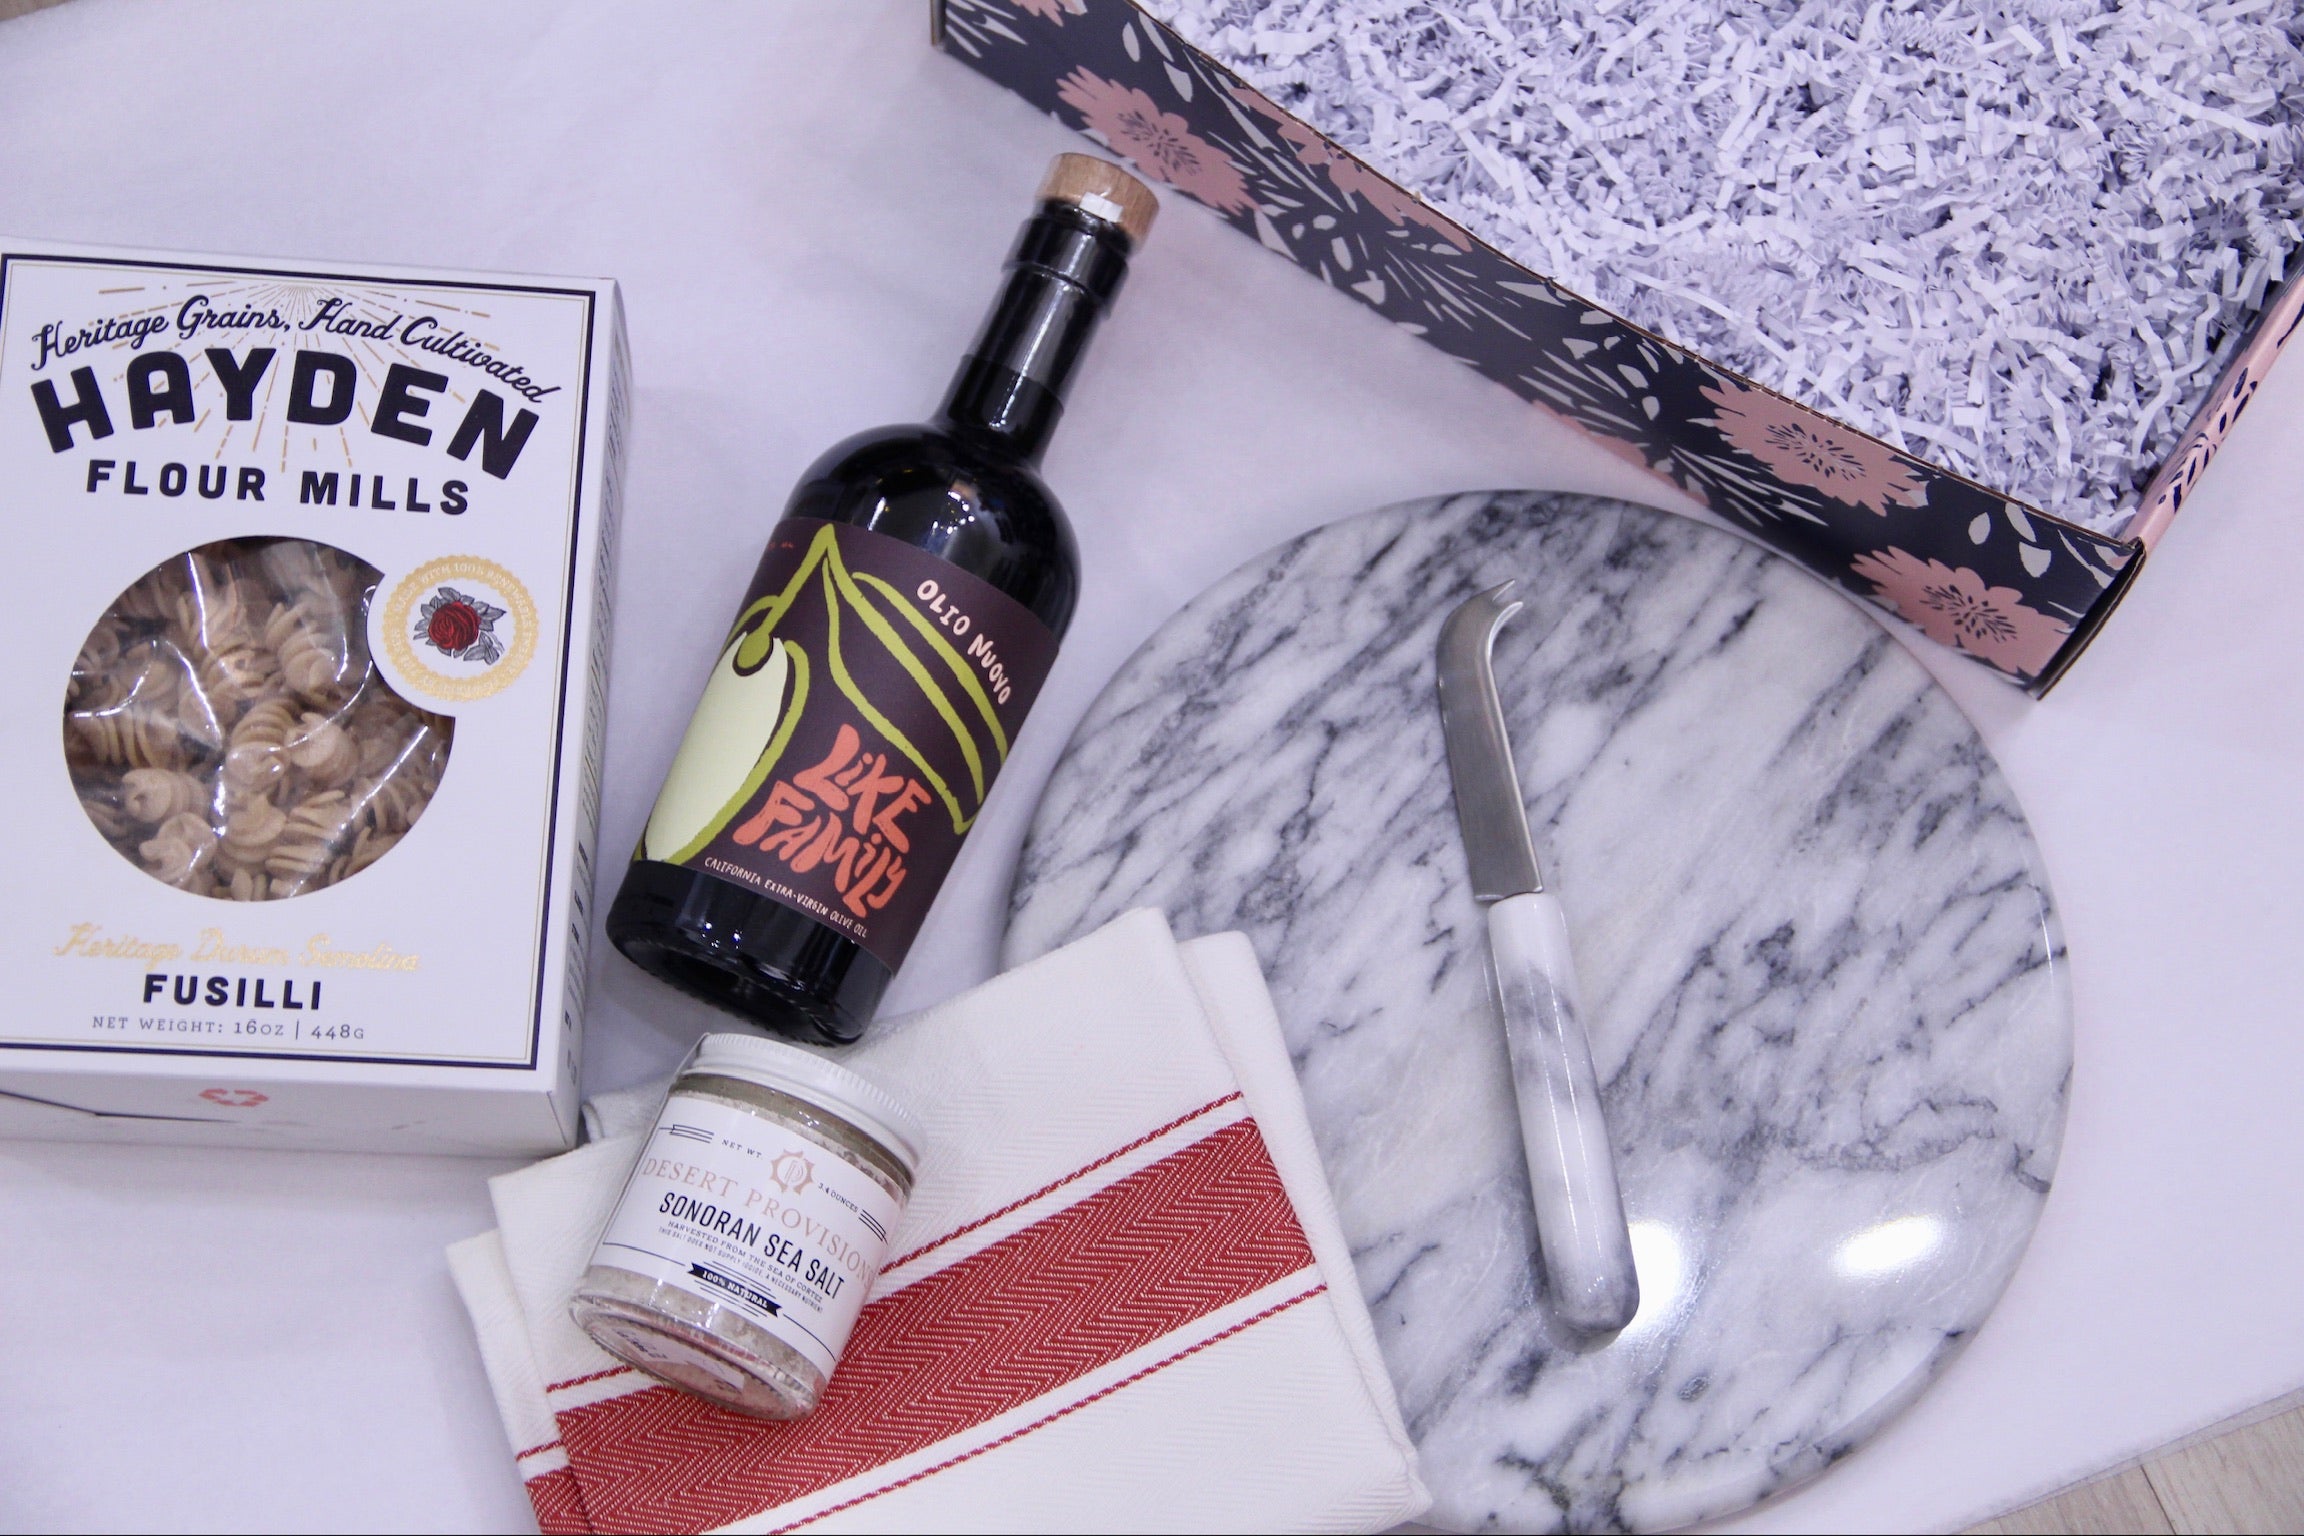 hayden pasta, olive oil bottle, sonoran sea salt, hand towel, marble cheese tray and knife, box 